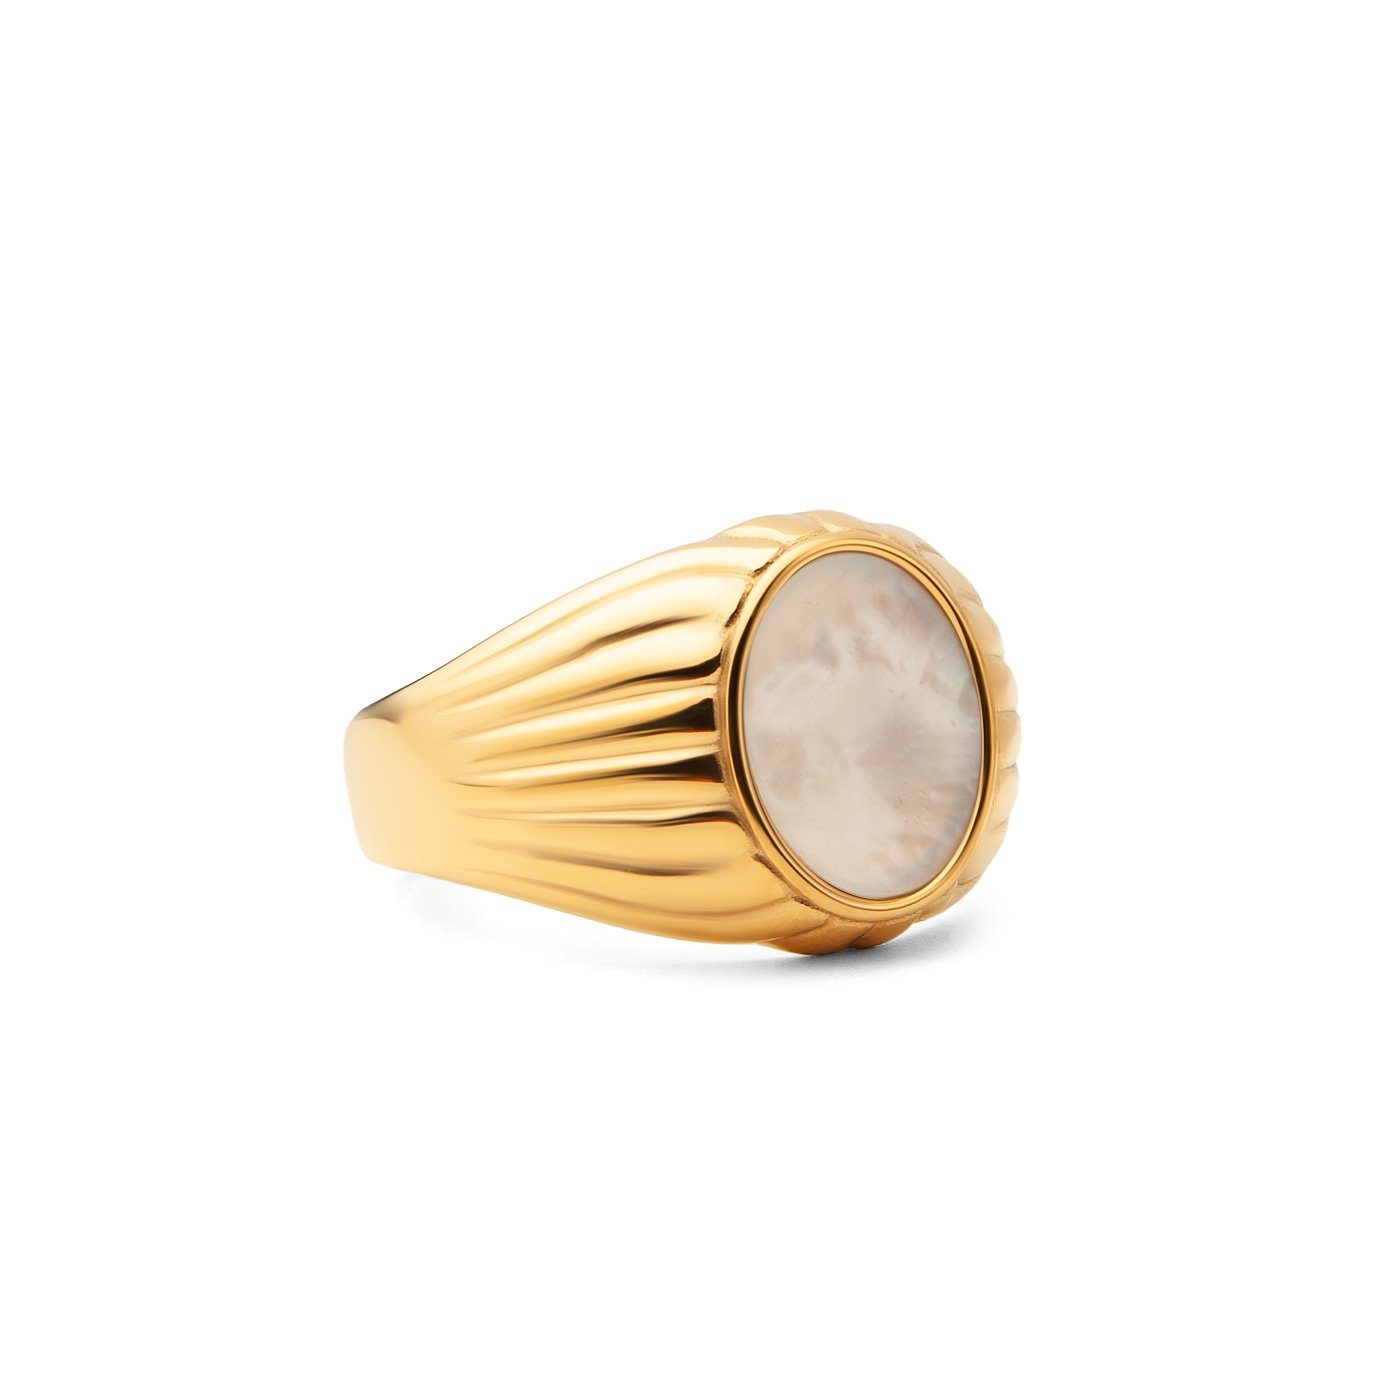 Oval pearl ring